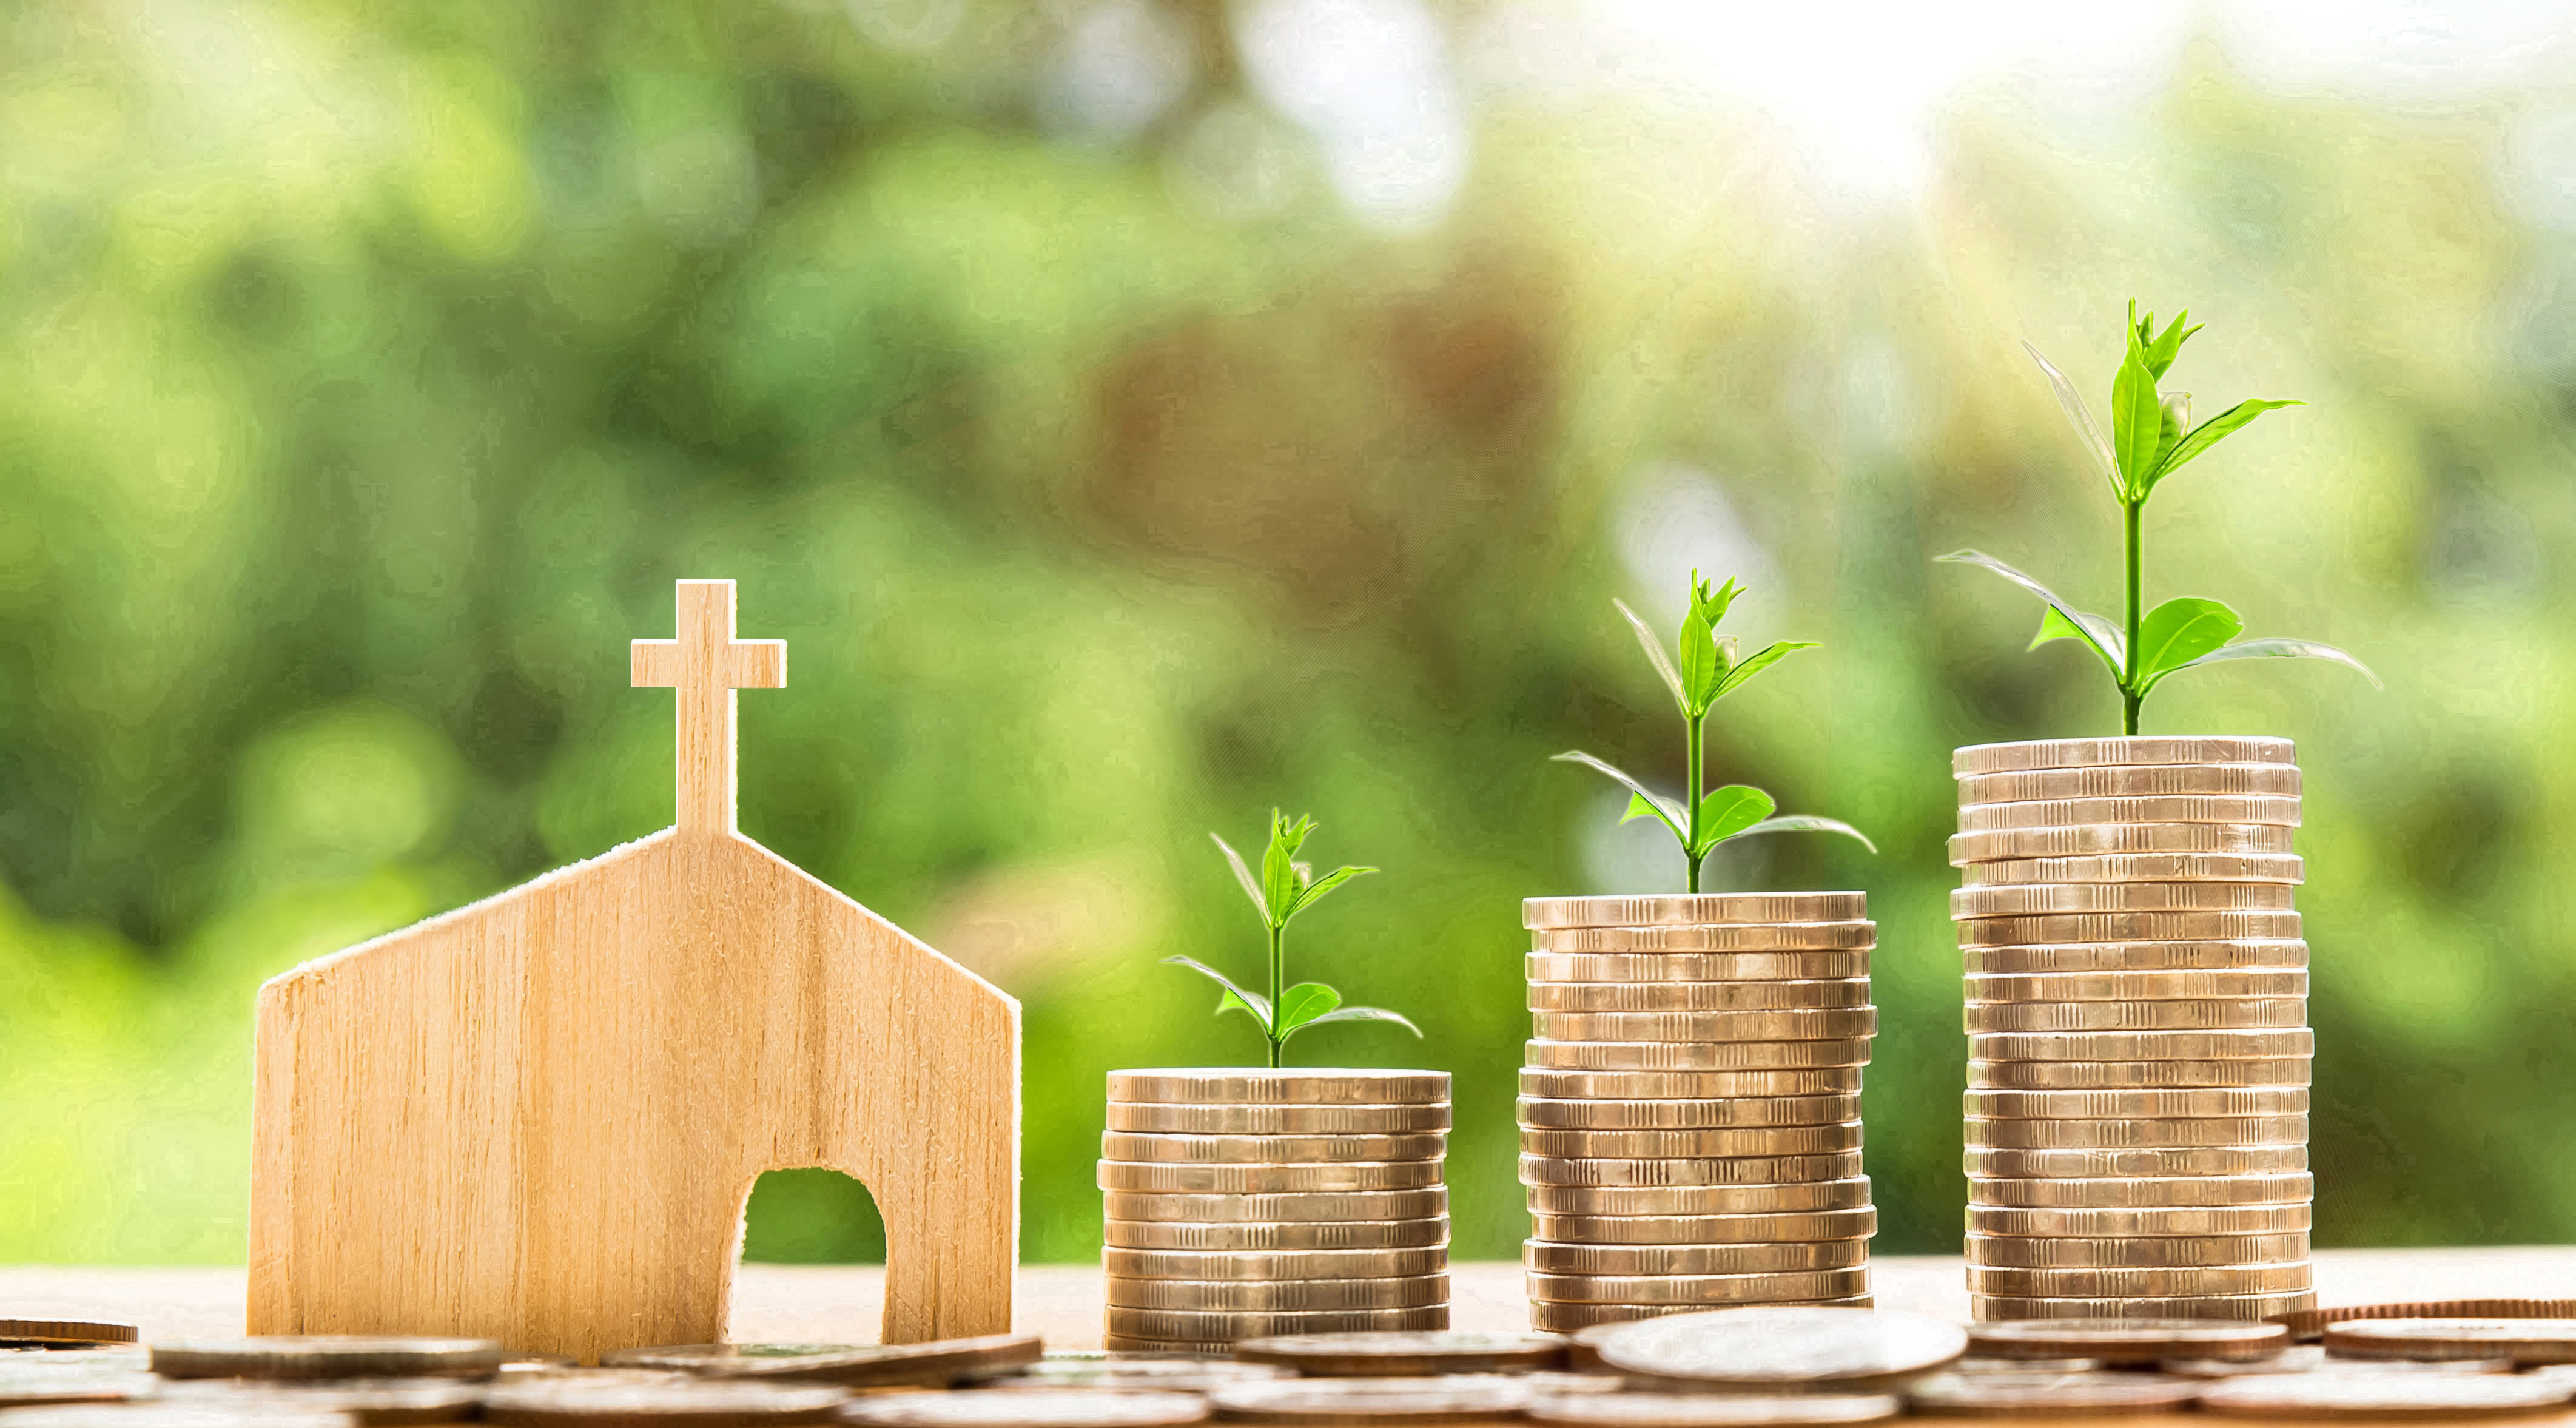 Wespath Benefits and Investments, the United Methodist pension agency, is working to prepare for whatever happens at the 2019 special General Conference. Photo by Nattanan Kanchanaprat, courtesy of Pixabay; adapted by United Methodist News Service.